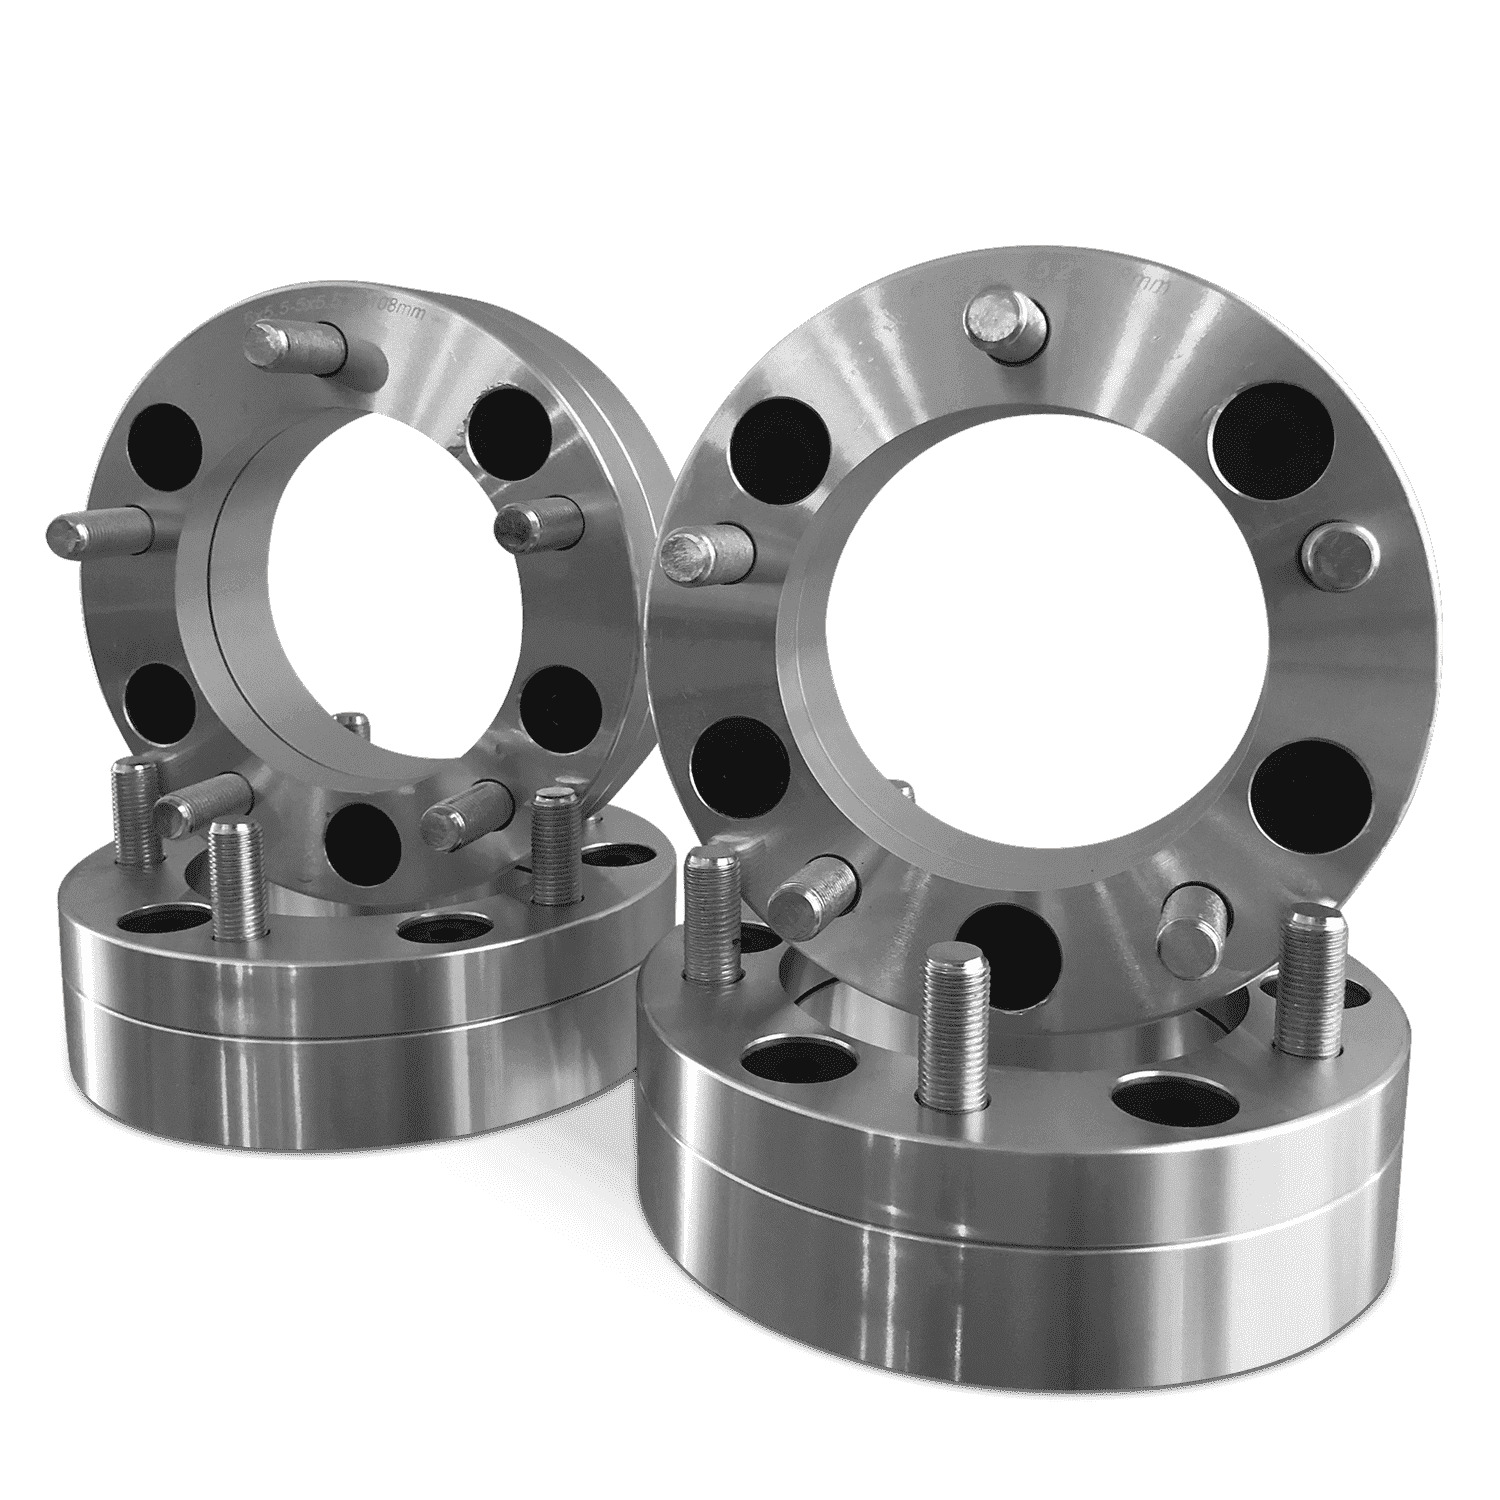 4x4.5 To 5x4.5 Wheel Adapters 2\